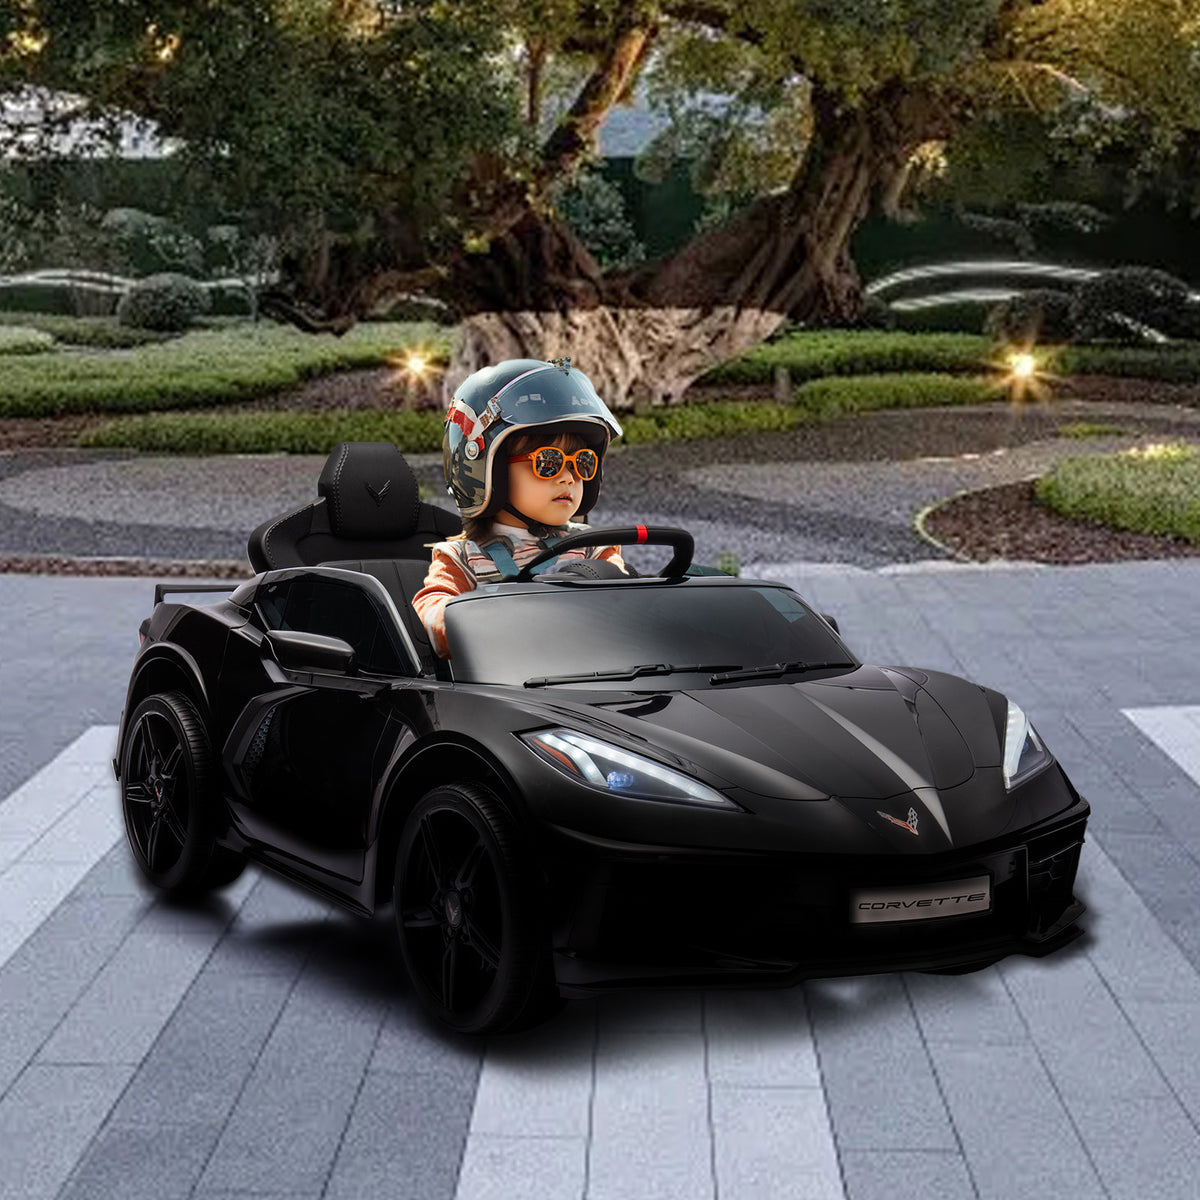 XJD Corvette C8 12V Electric Ride-On Car for Kids - Dual Speed, LED, USB, Bluetooth, Parental Control, for Ages 3+, Black